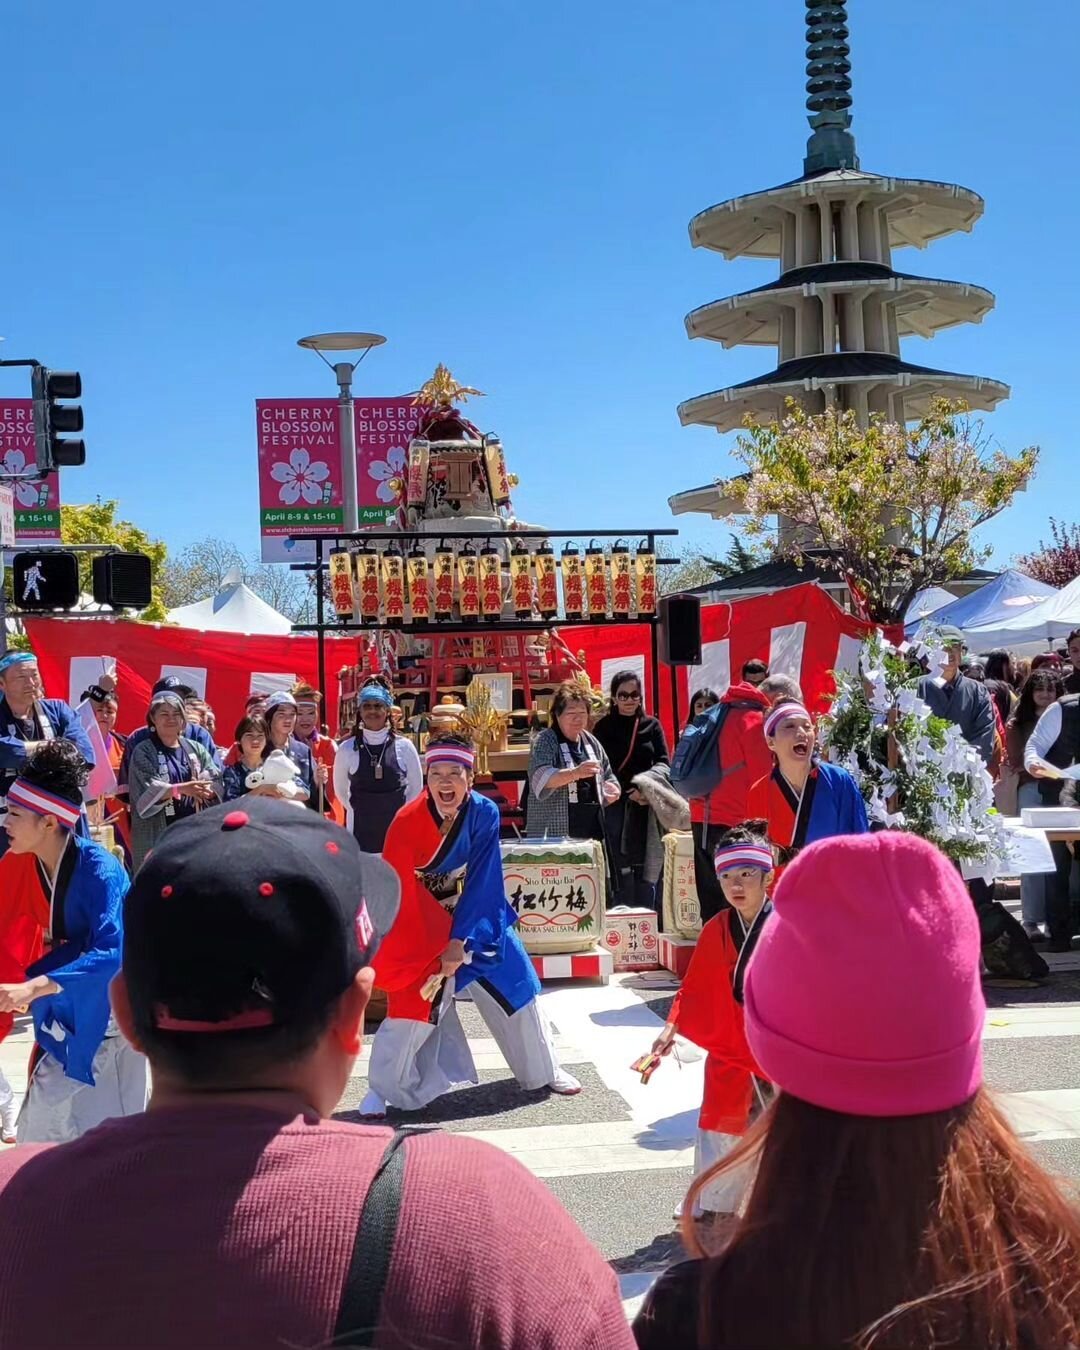 California&rsquo;s most prominent celebrations of Asian traditions and the largest Cherry Blossom Festival on the West Coast. Don't miss the 57th Annual Northern California Cherry Blossom Festival!

🌸April 13-14 &amp; 20-21
🌸11a-6p
🌸Japantown
🌸Gr